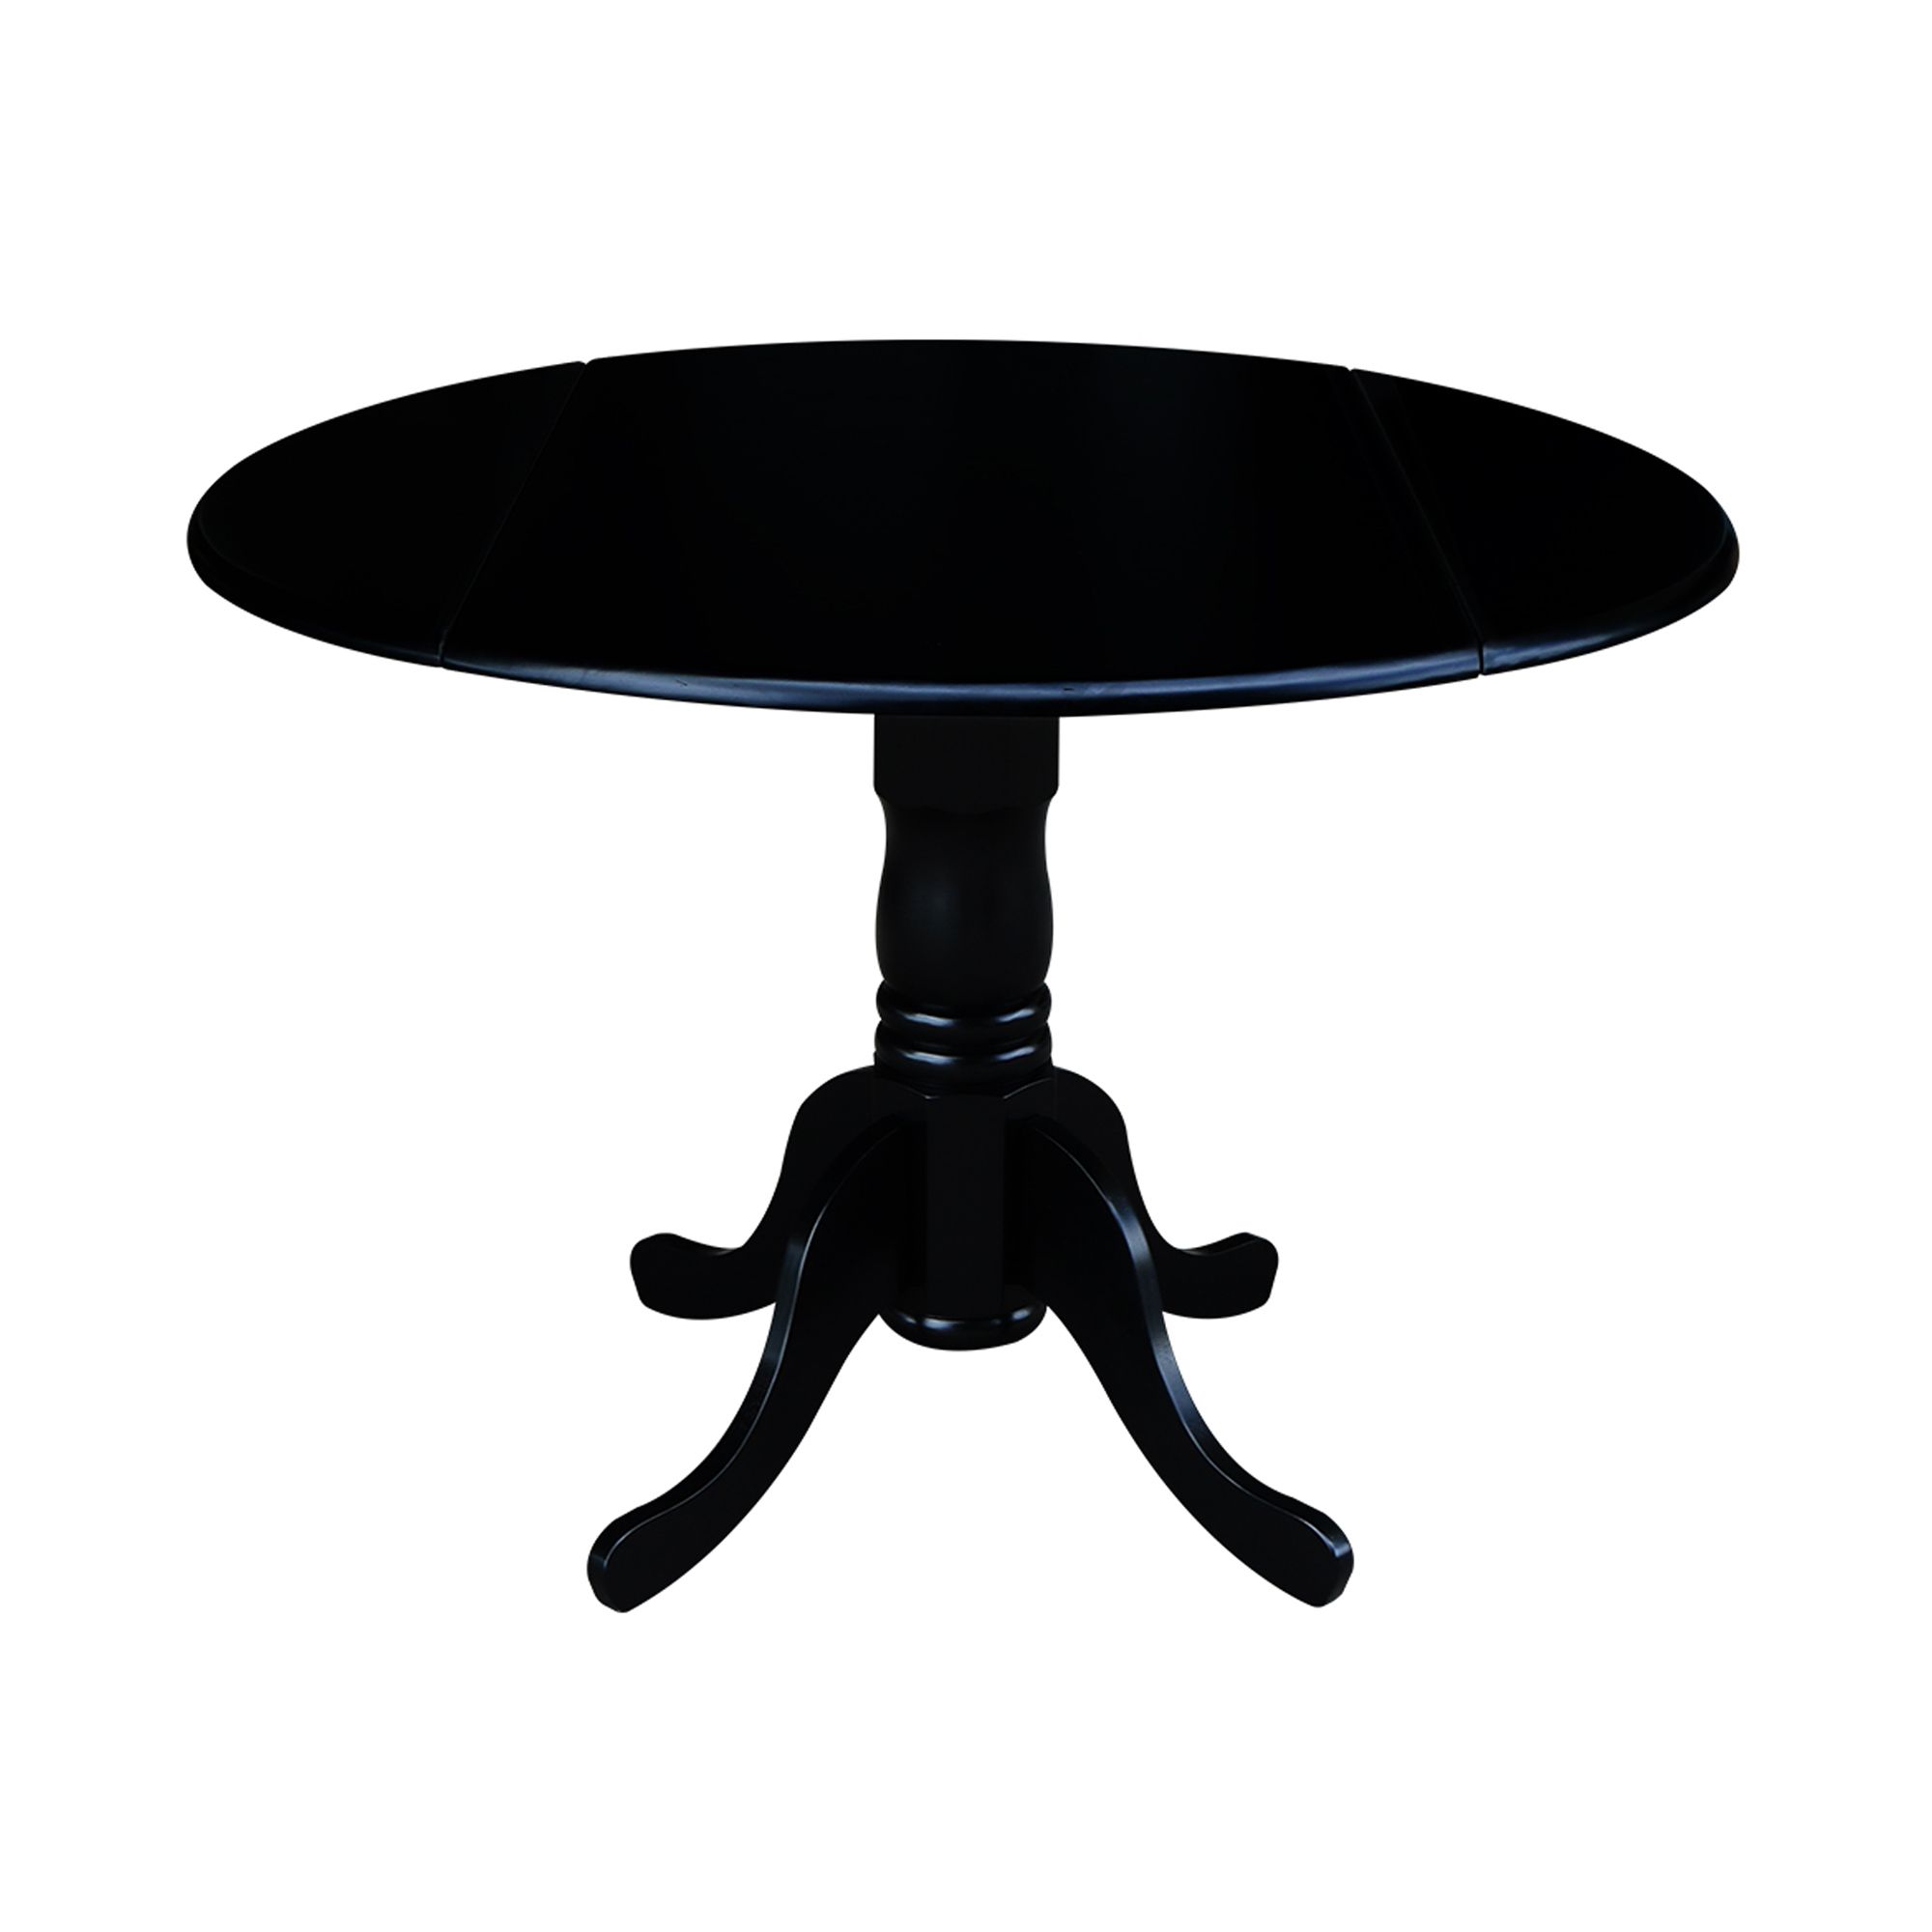 International Concepts 42" Round Dual Drop Leaf Pedestal Intended For Most Recent Round Pedestal Dining Tables With One Leaf (View 13 of 15)